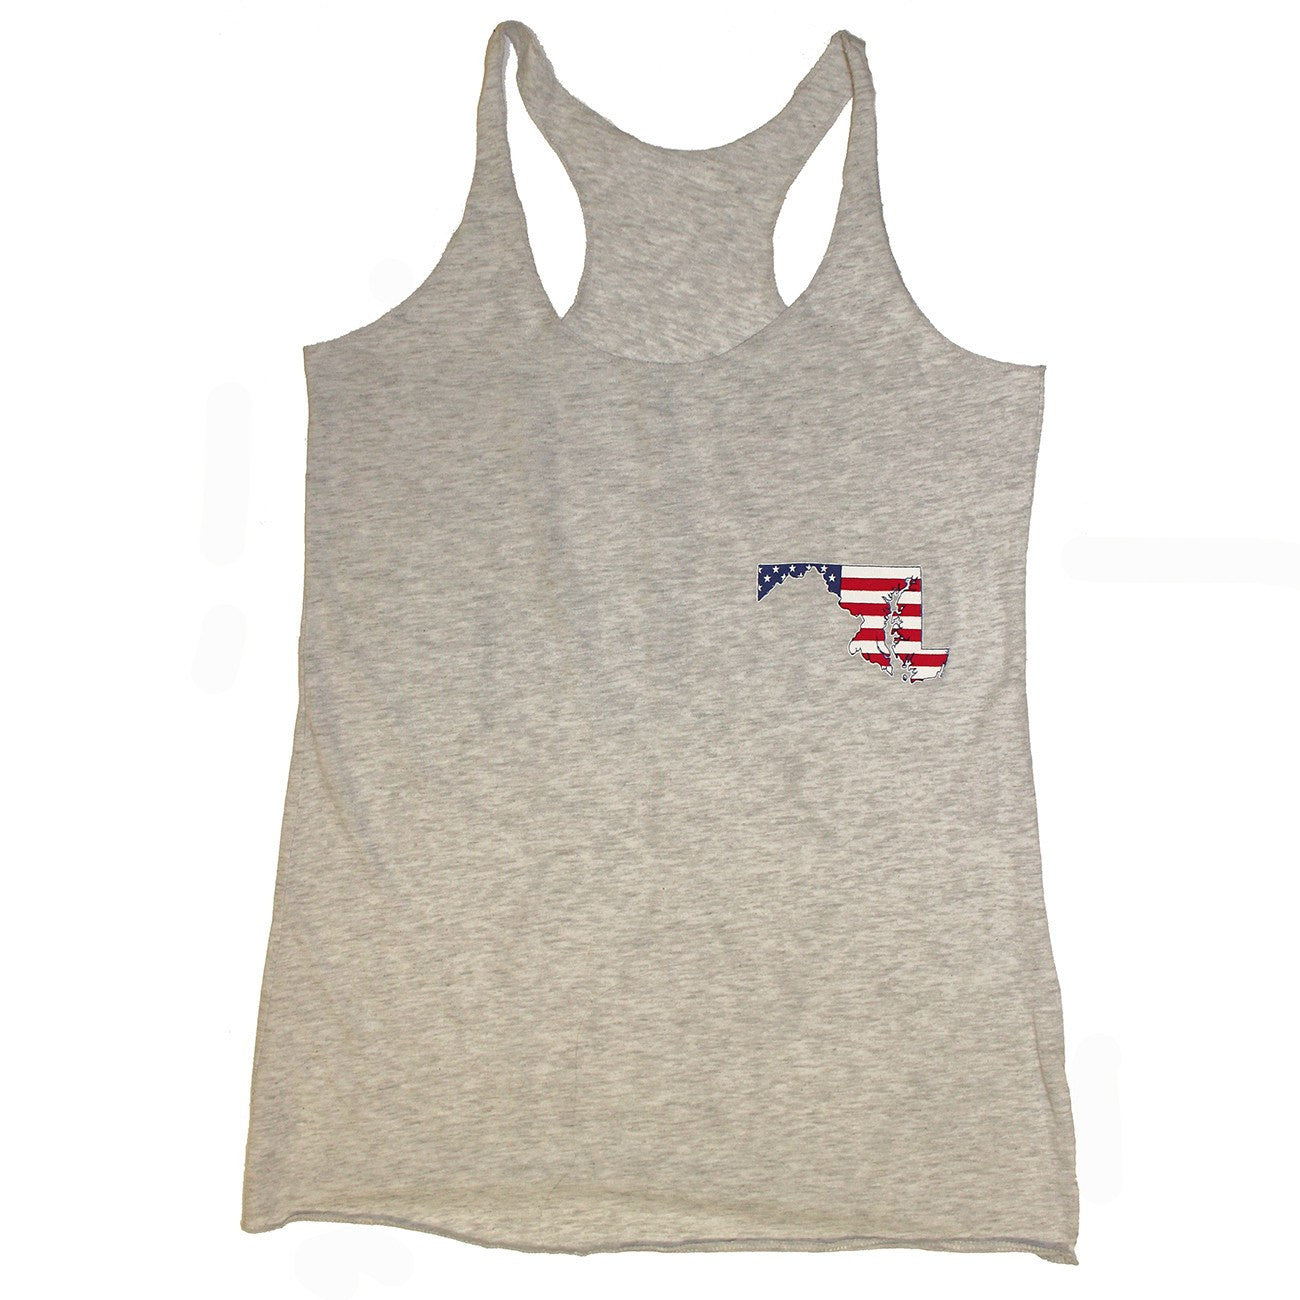 Land of the Free State (Heather Grey) / Ladies Racerback Tank - Route One Apparel